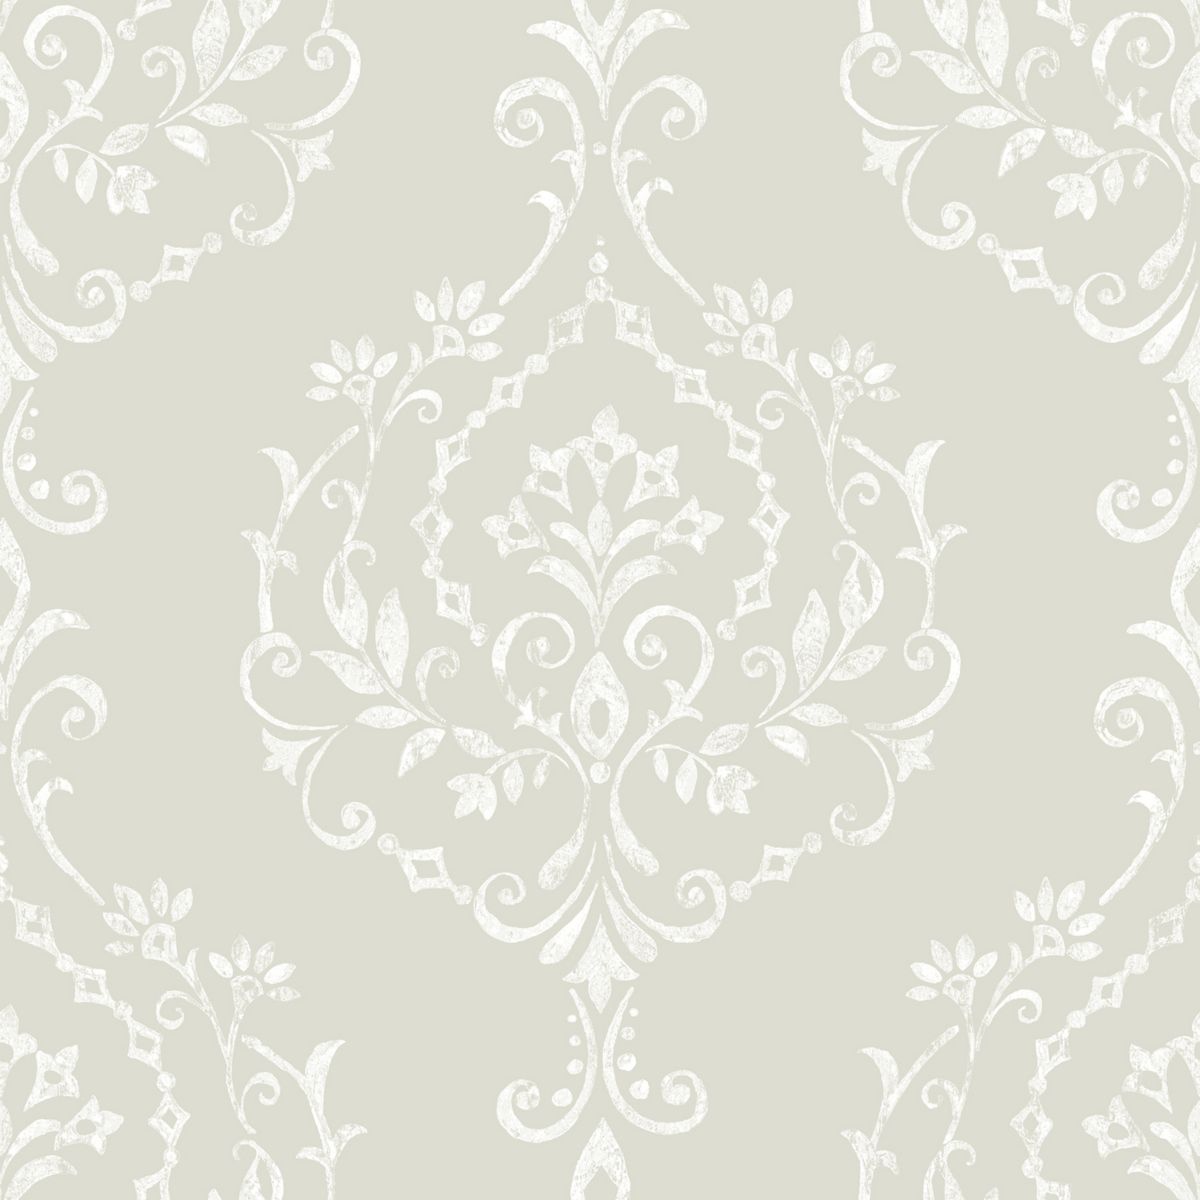 RoomMates New Damask Peel and Stick Wallpaper RoomMates